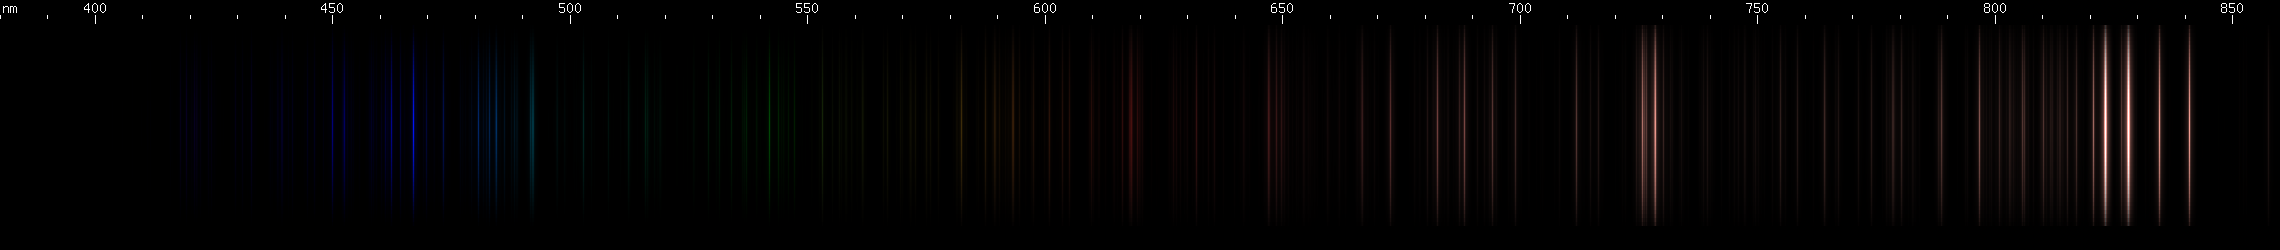 Spectral lines of Xenon.